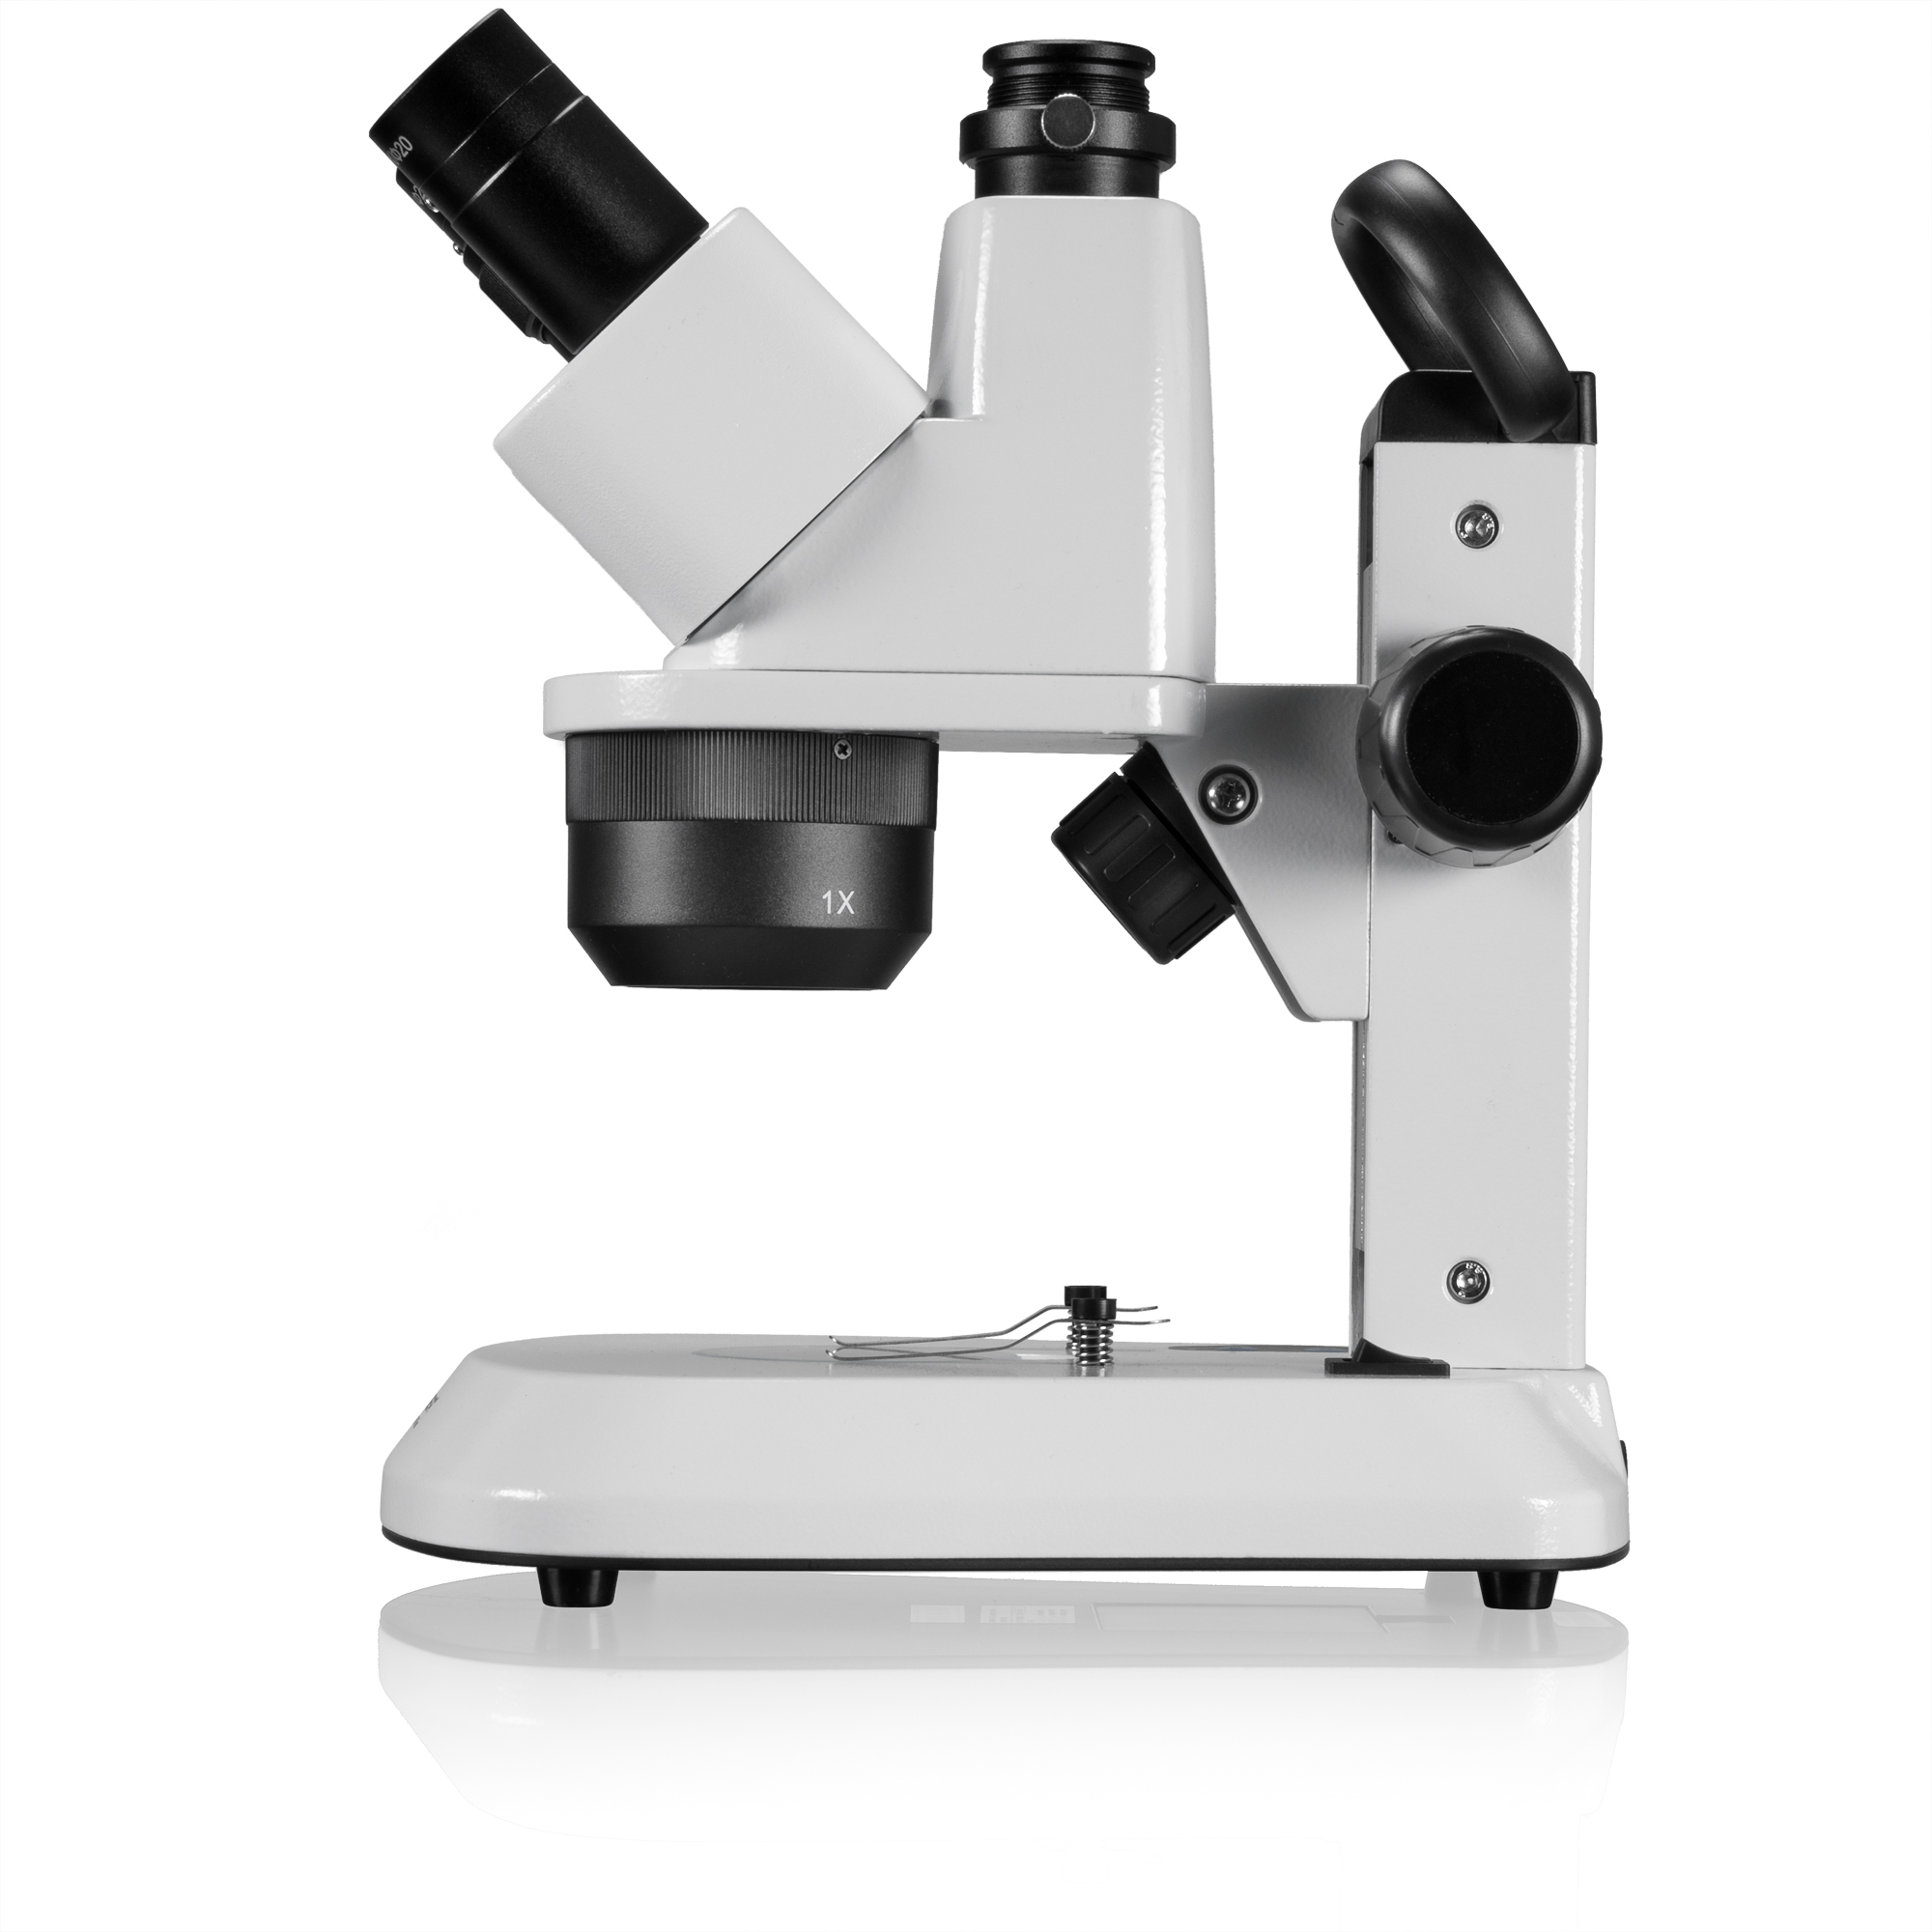 BRESSER Analyth STR Trino 10x - 40x trinoculary stereo microscope with incident- and transmitted light